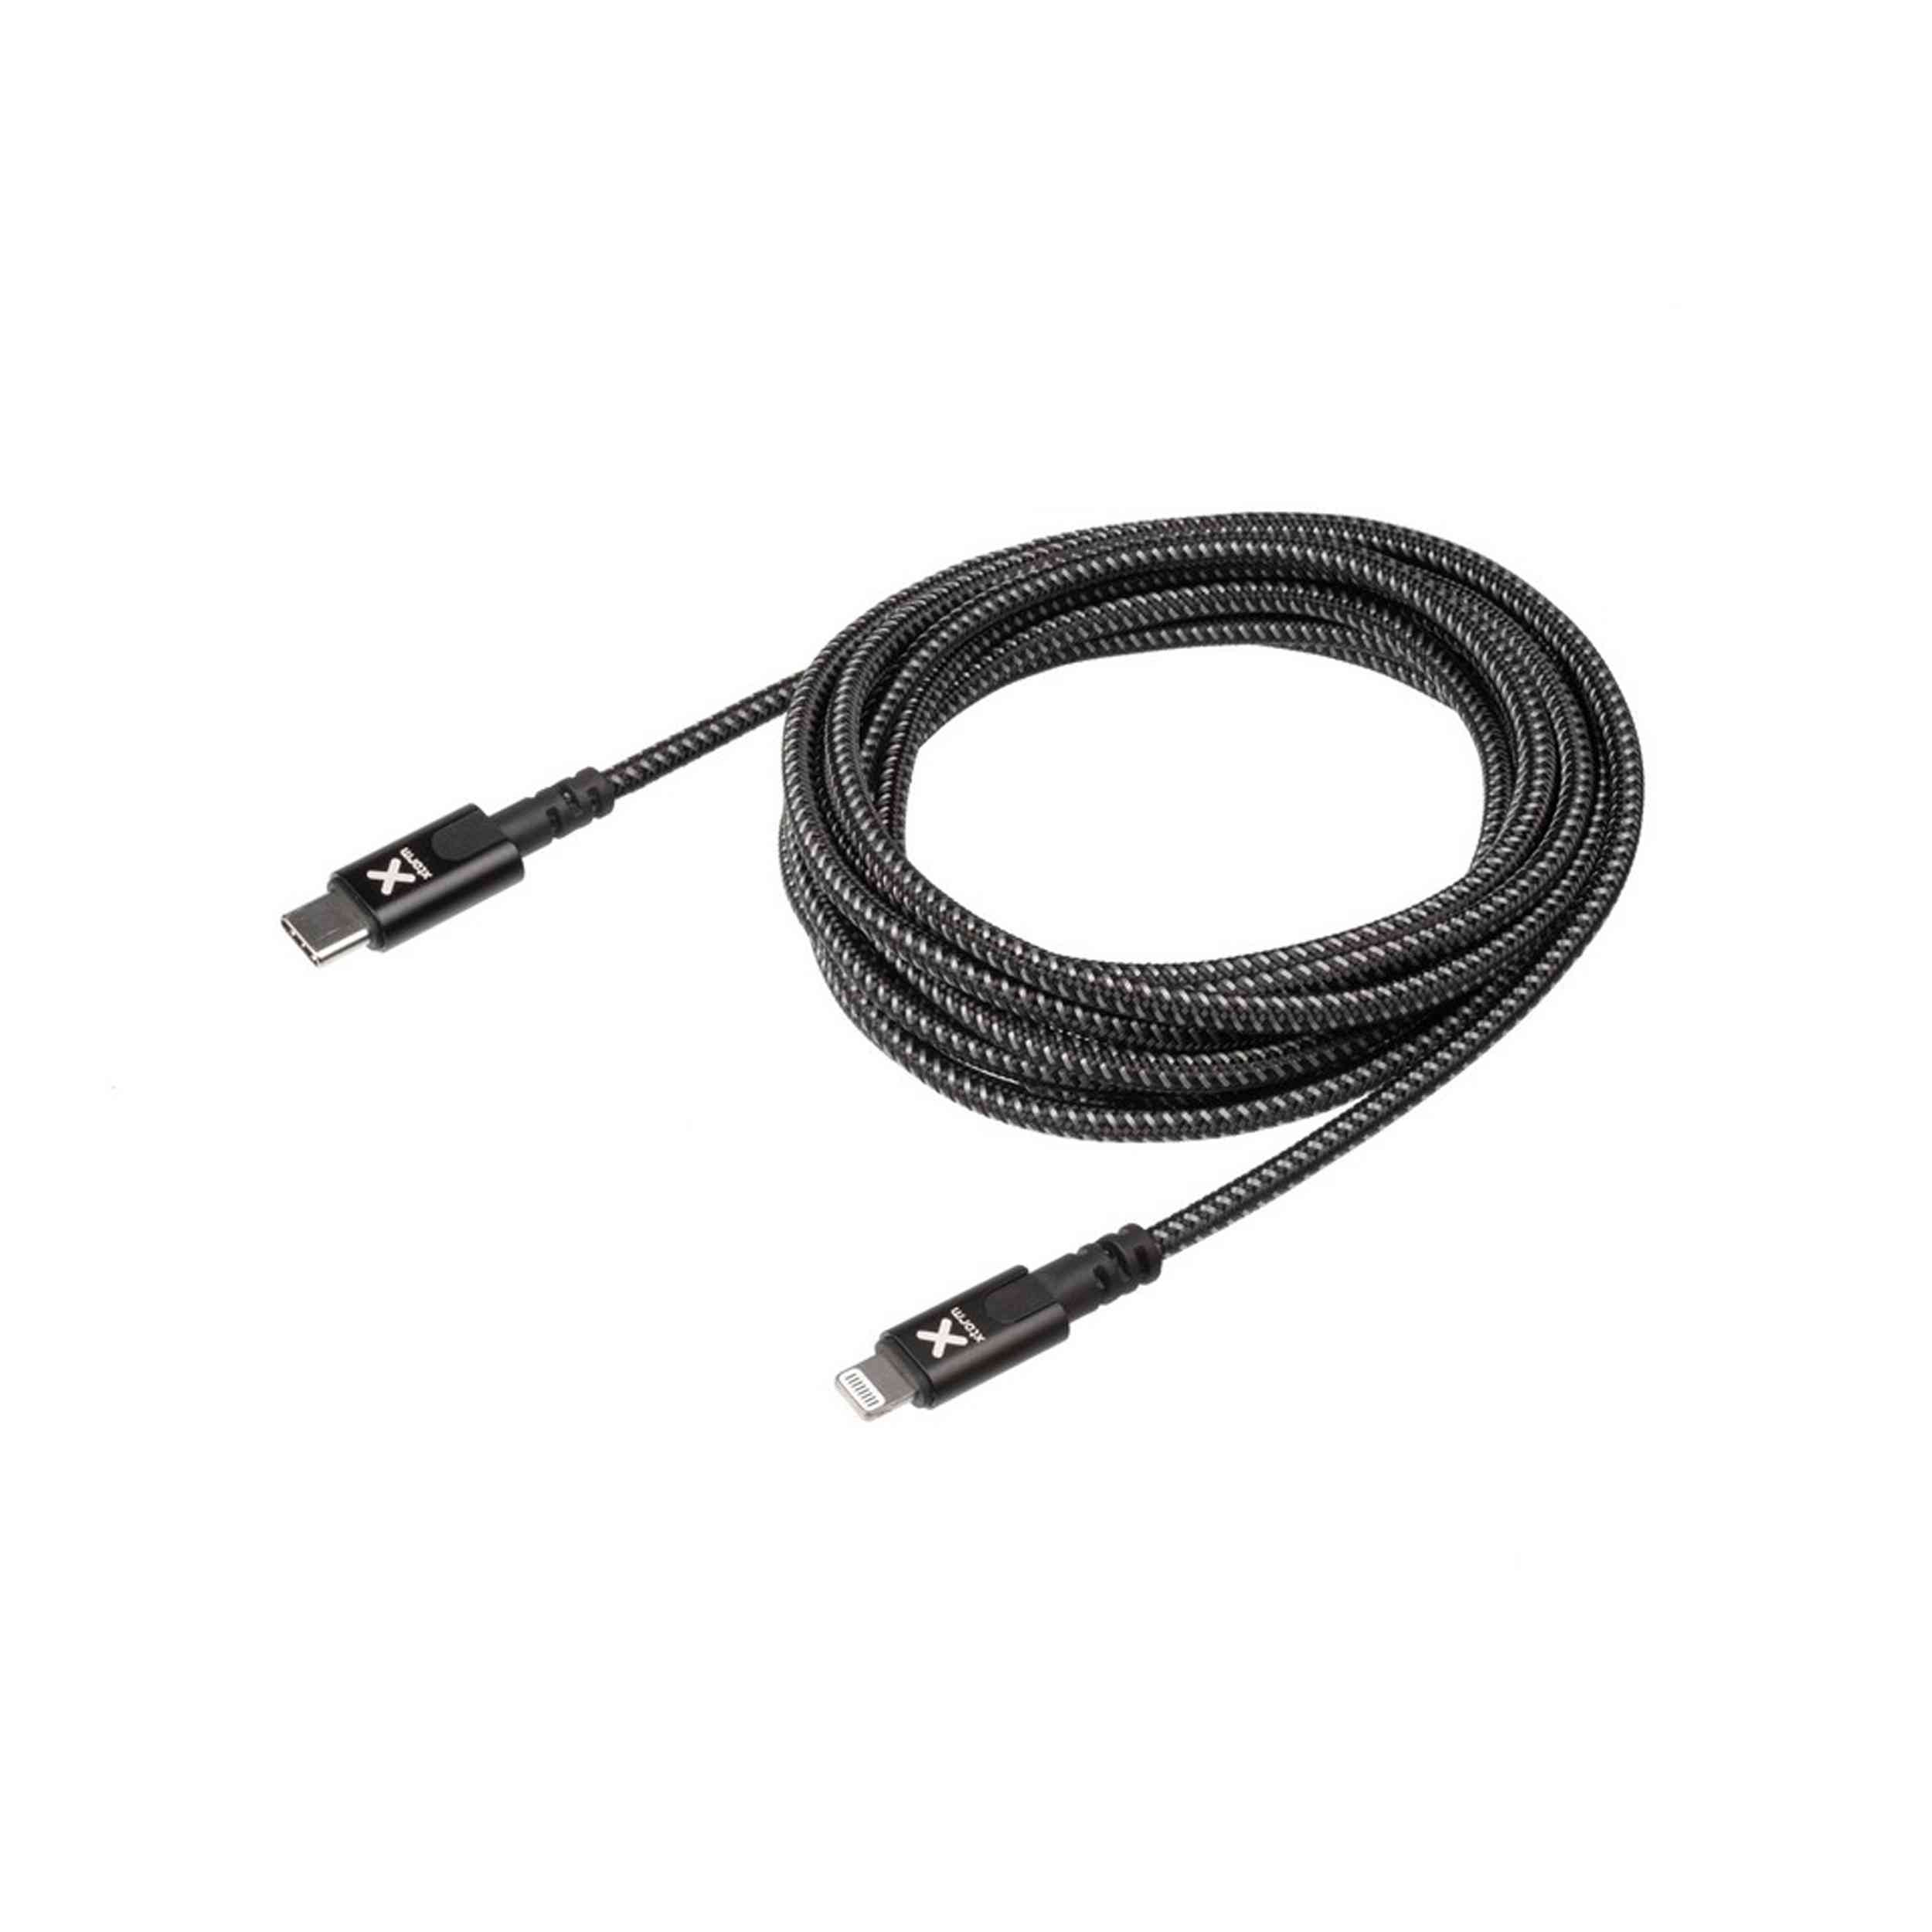 XTORM CABLE